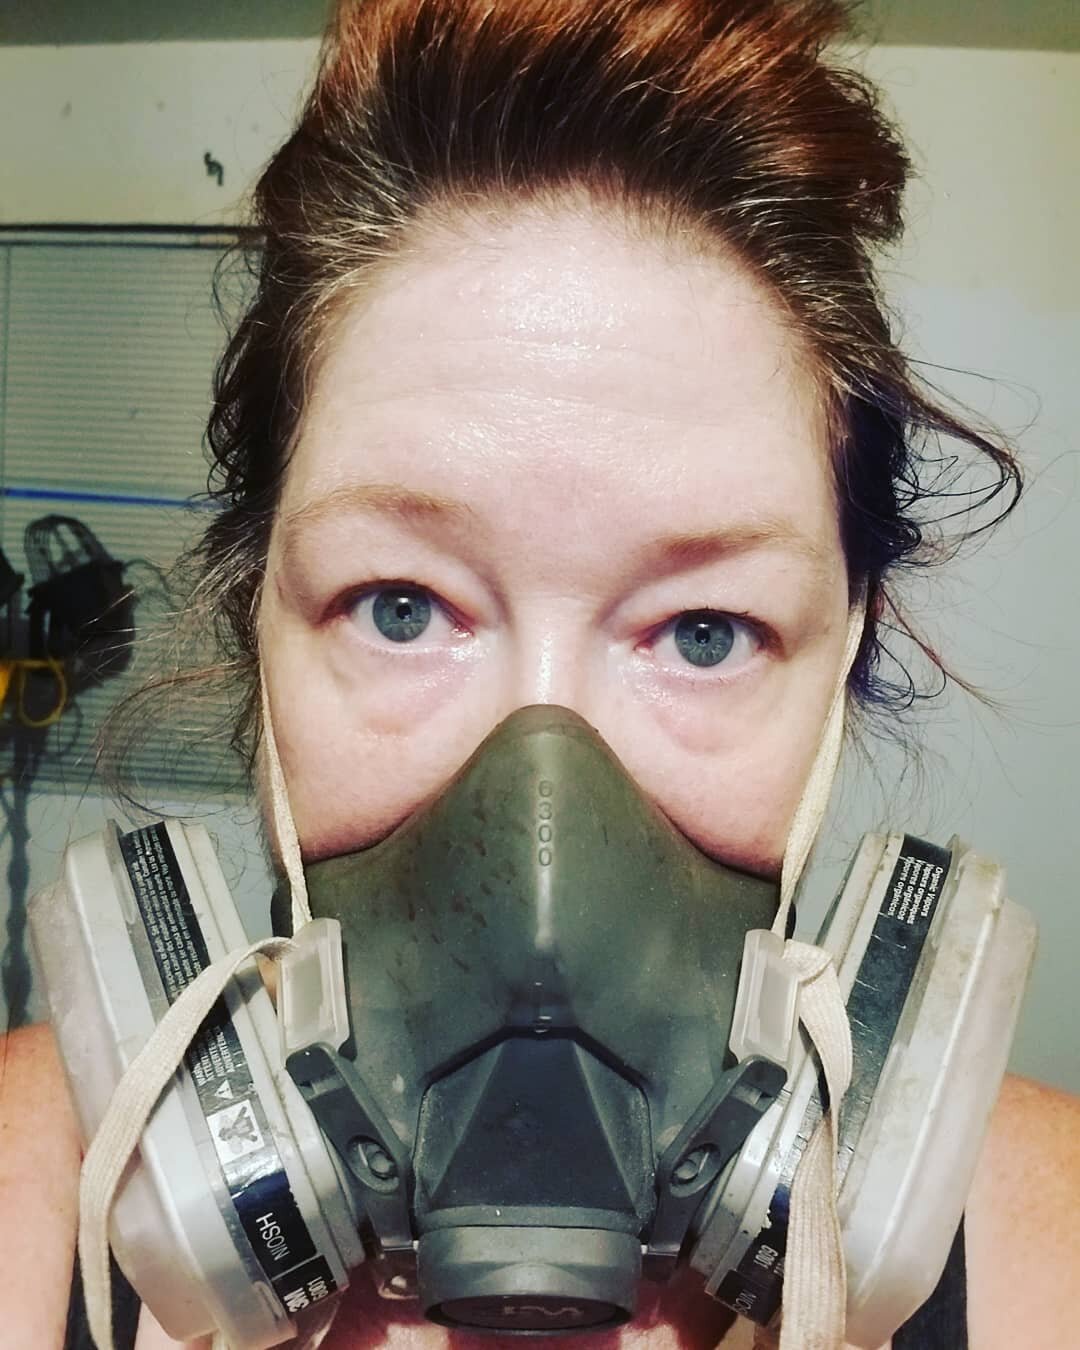 Glad I've gotten somewhat quicker at pouring resin over the years, because it is kind of miserable work on hot days, whew. Dripping sweat is one too many moving parts! #sweatyselfie #resin #resinart #goinggrey